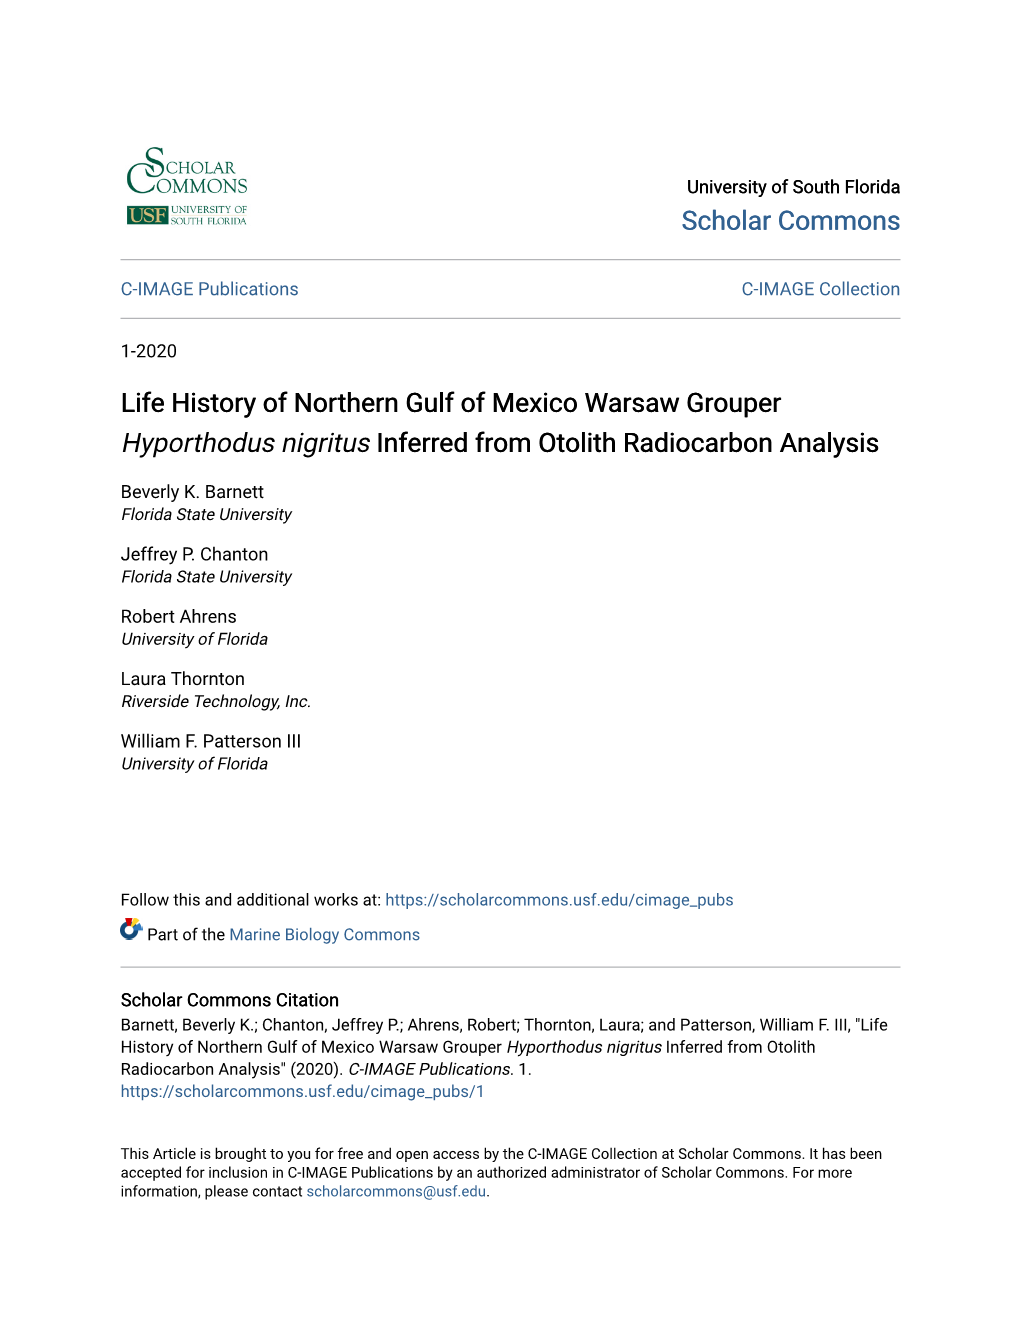 Life History of Northern Gulf of Mexico Warsaw Grouper Hyporthodus Nigritus Inferred from Otolith Radiocarbon Analysis